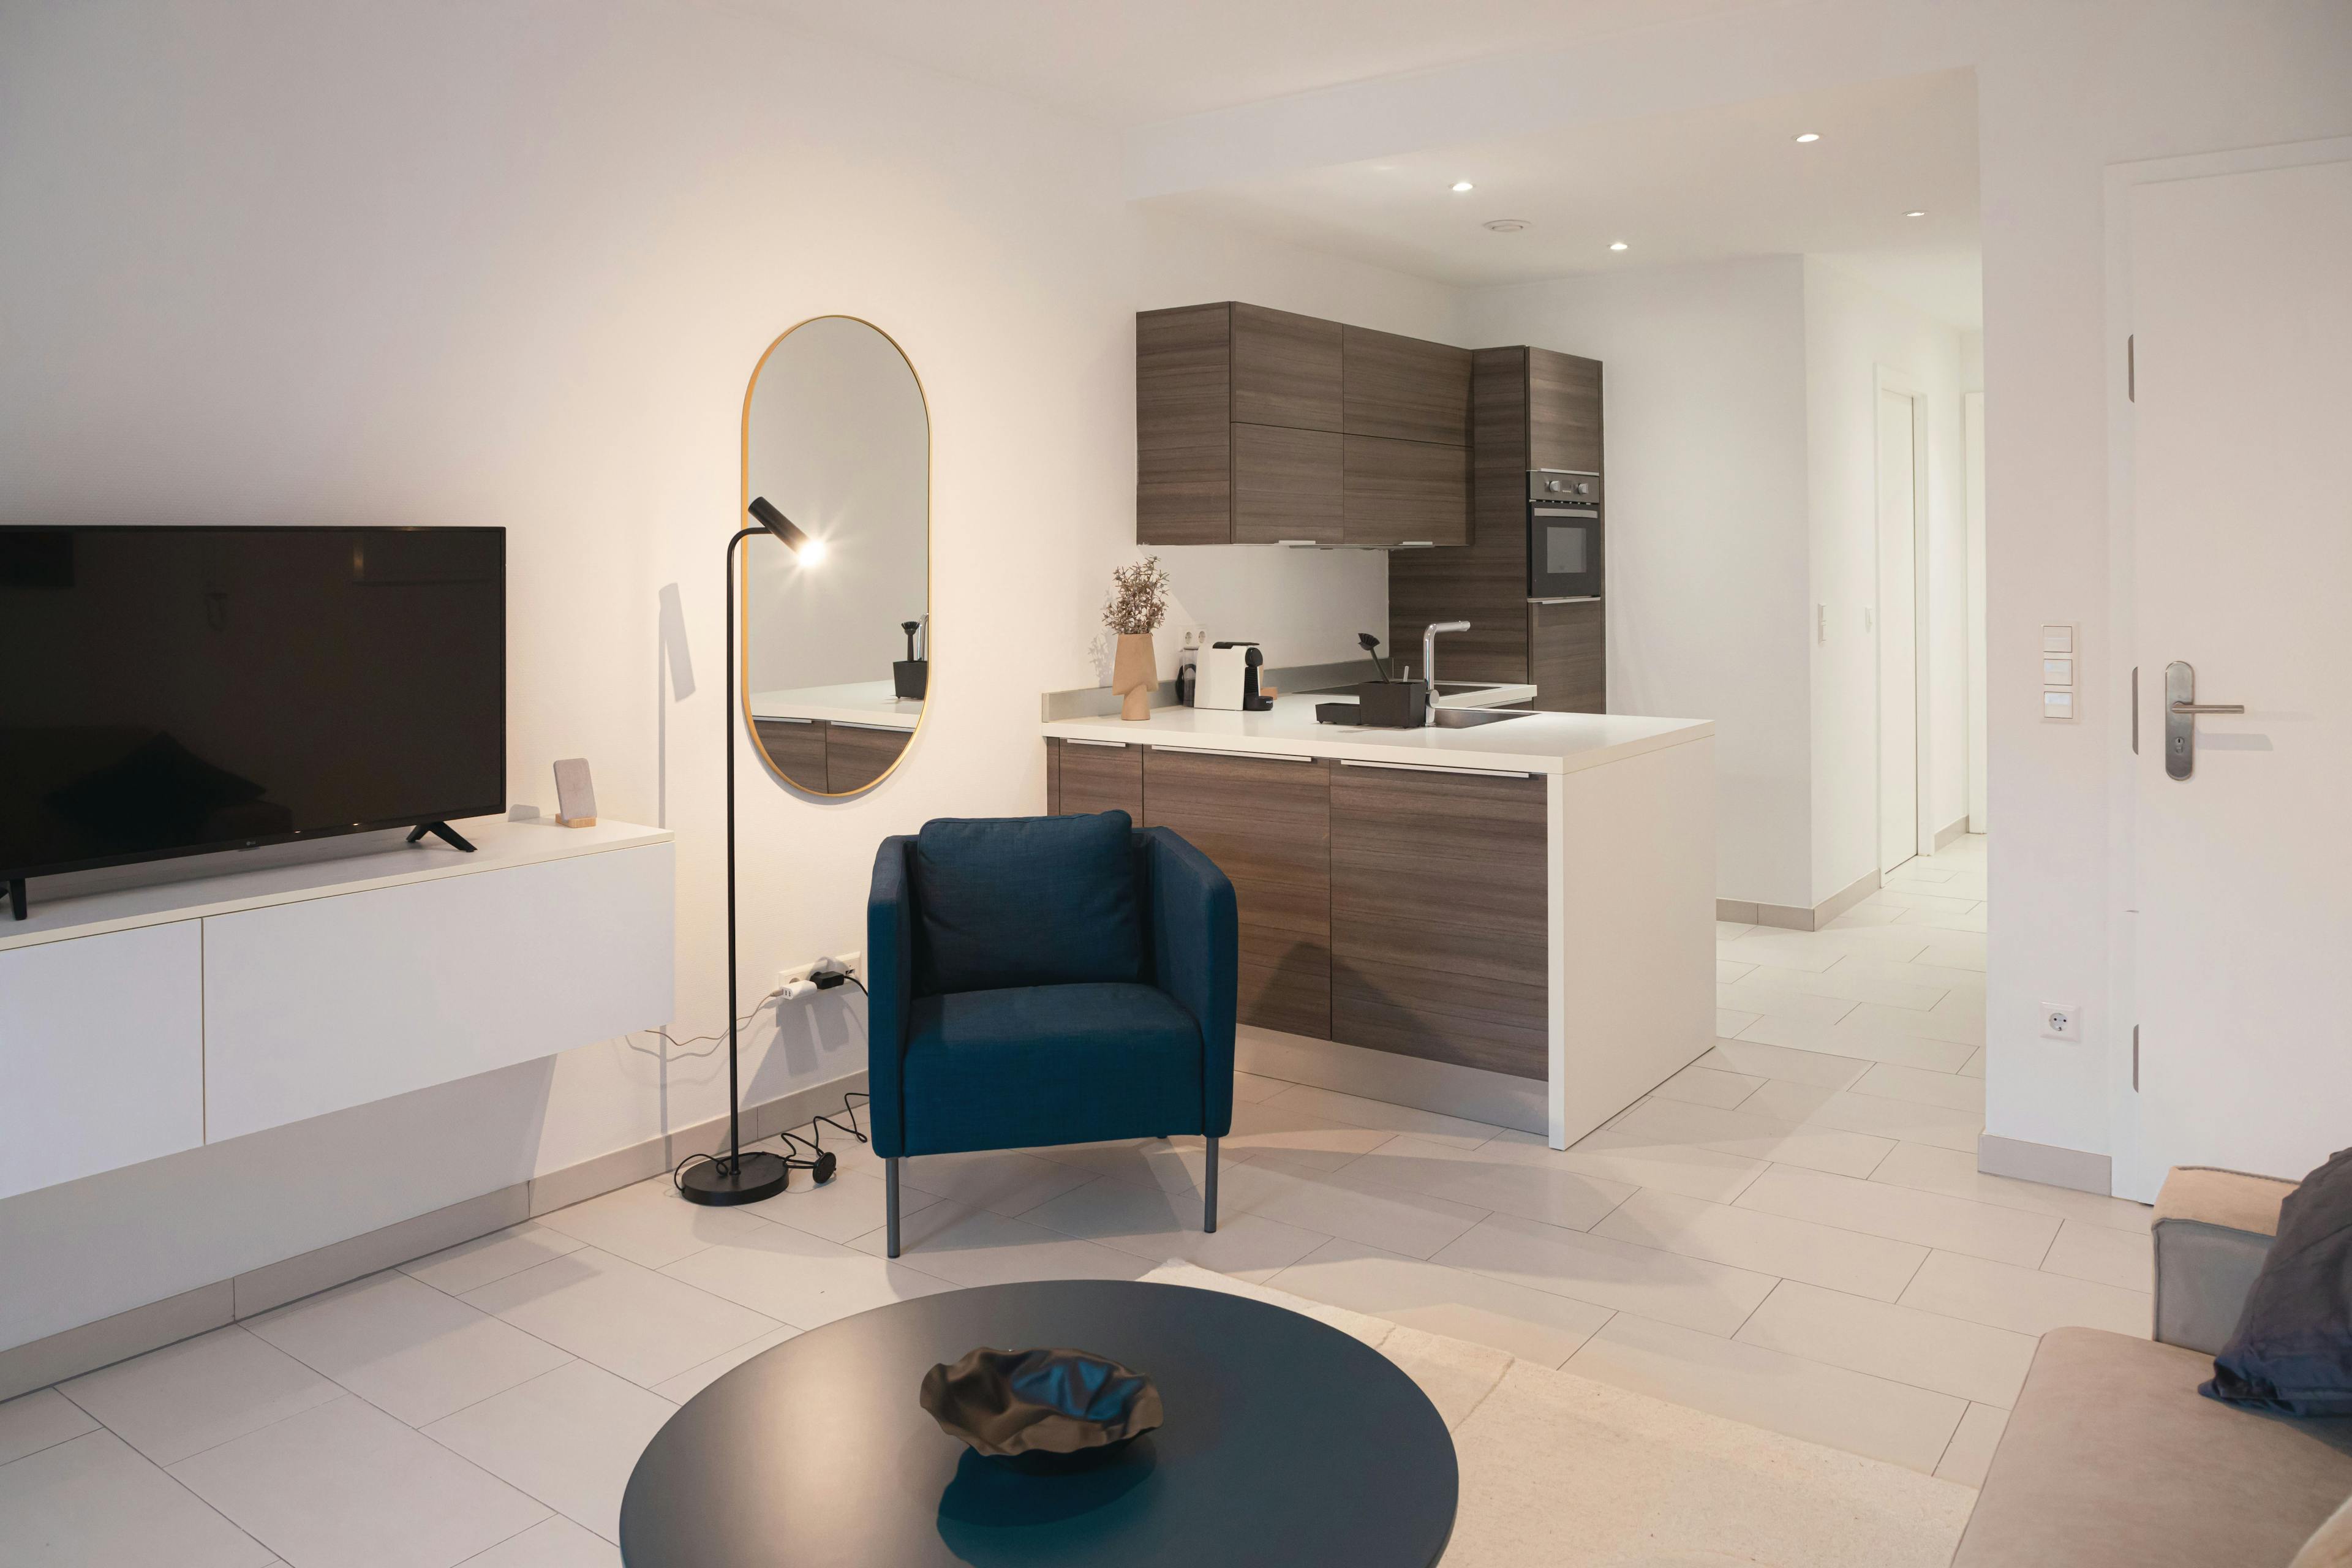 Zoomed-out image of the lounge and kitchen area, including the hallways in the background. It contains a  TV stand with a smart TV on it, an armchair next to a standing lamp, and a mirror on the wall. In front of the hallway, there is the fully equipped kitchen.